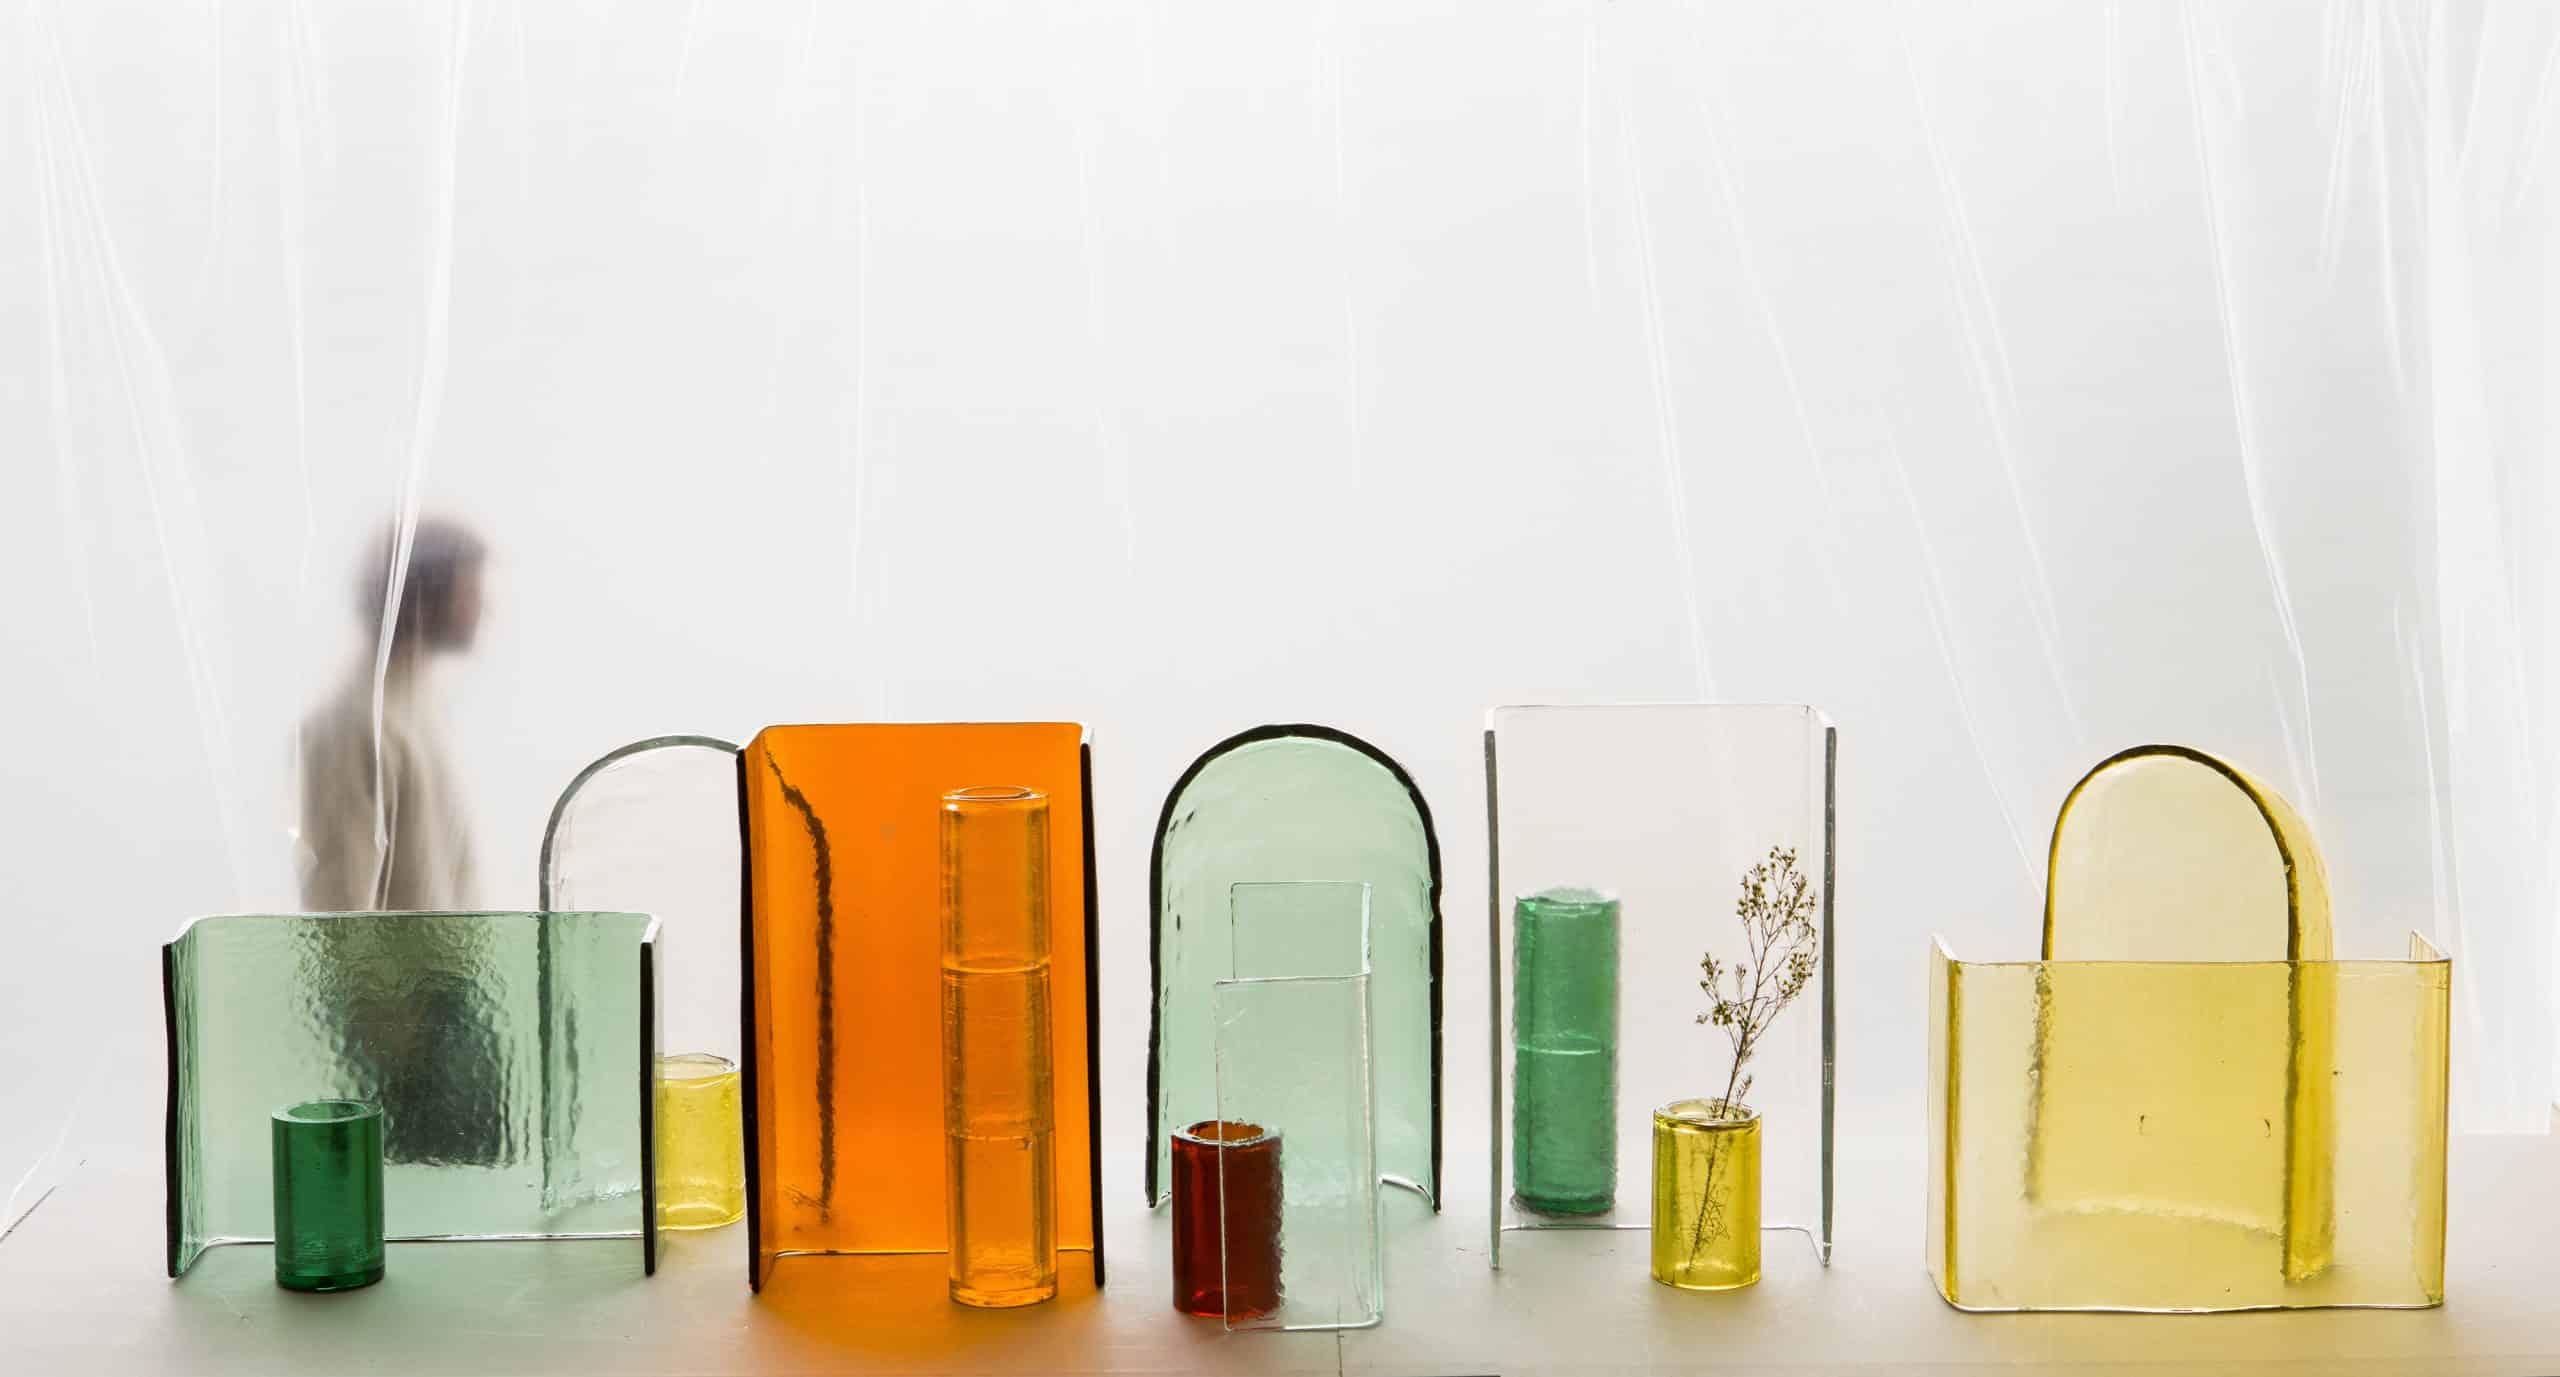 The Alcova series of vases by the Bouroullec brothers for WonderGlass